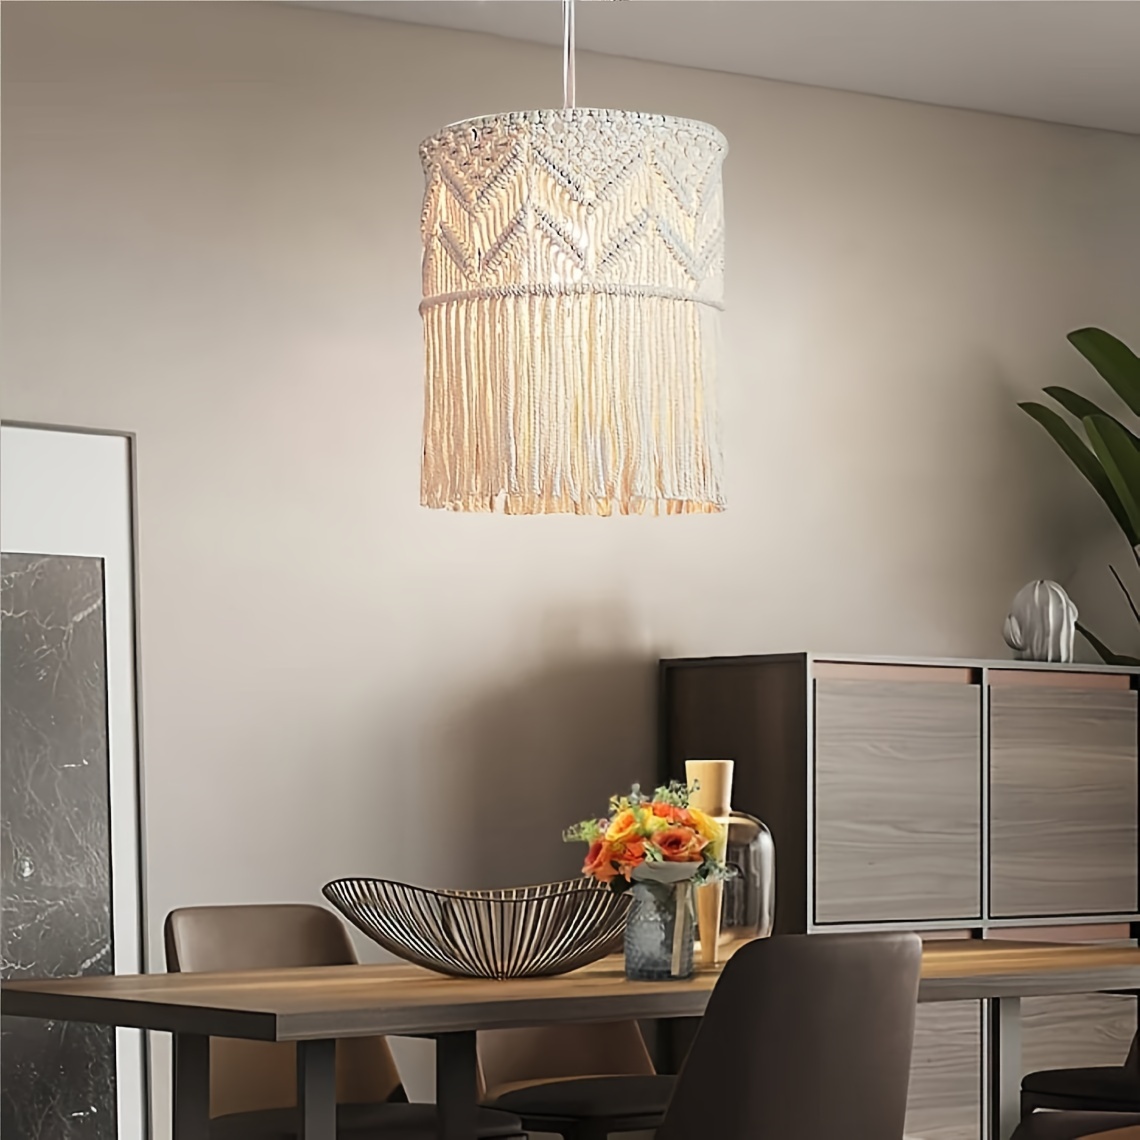 

1pc Bohemian Style Hanging Charm Hand-woven Tassel Pendant Light Decorative Lampshade - Does Not Include Light